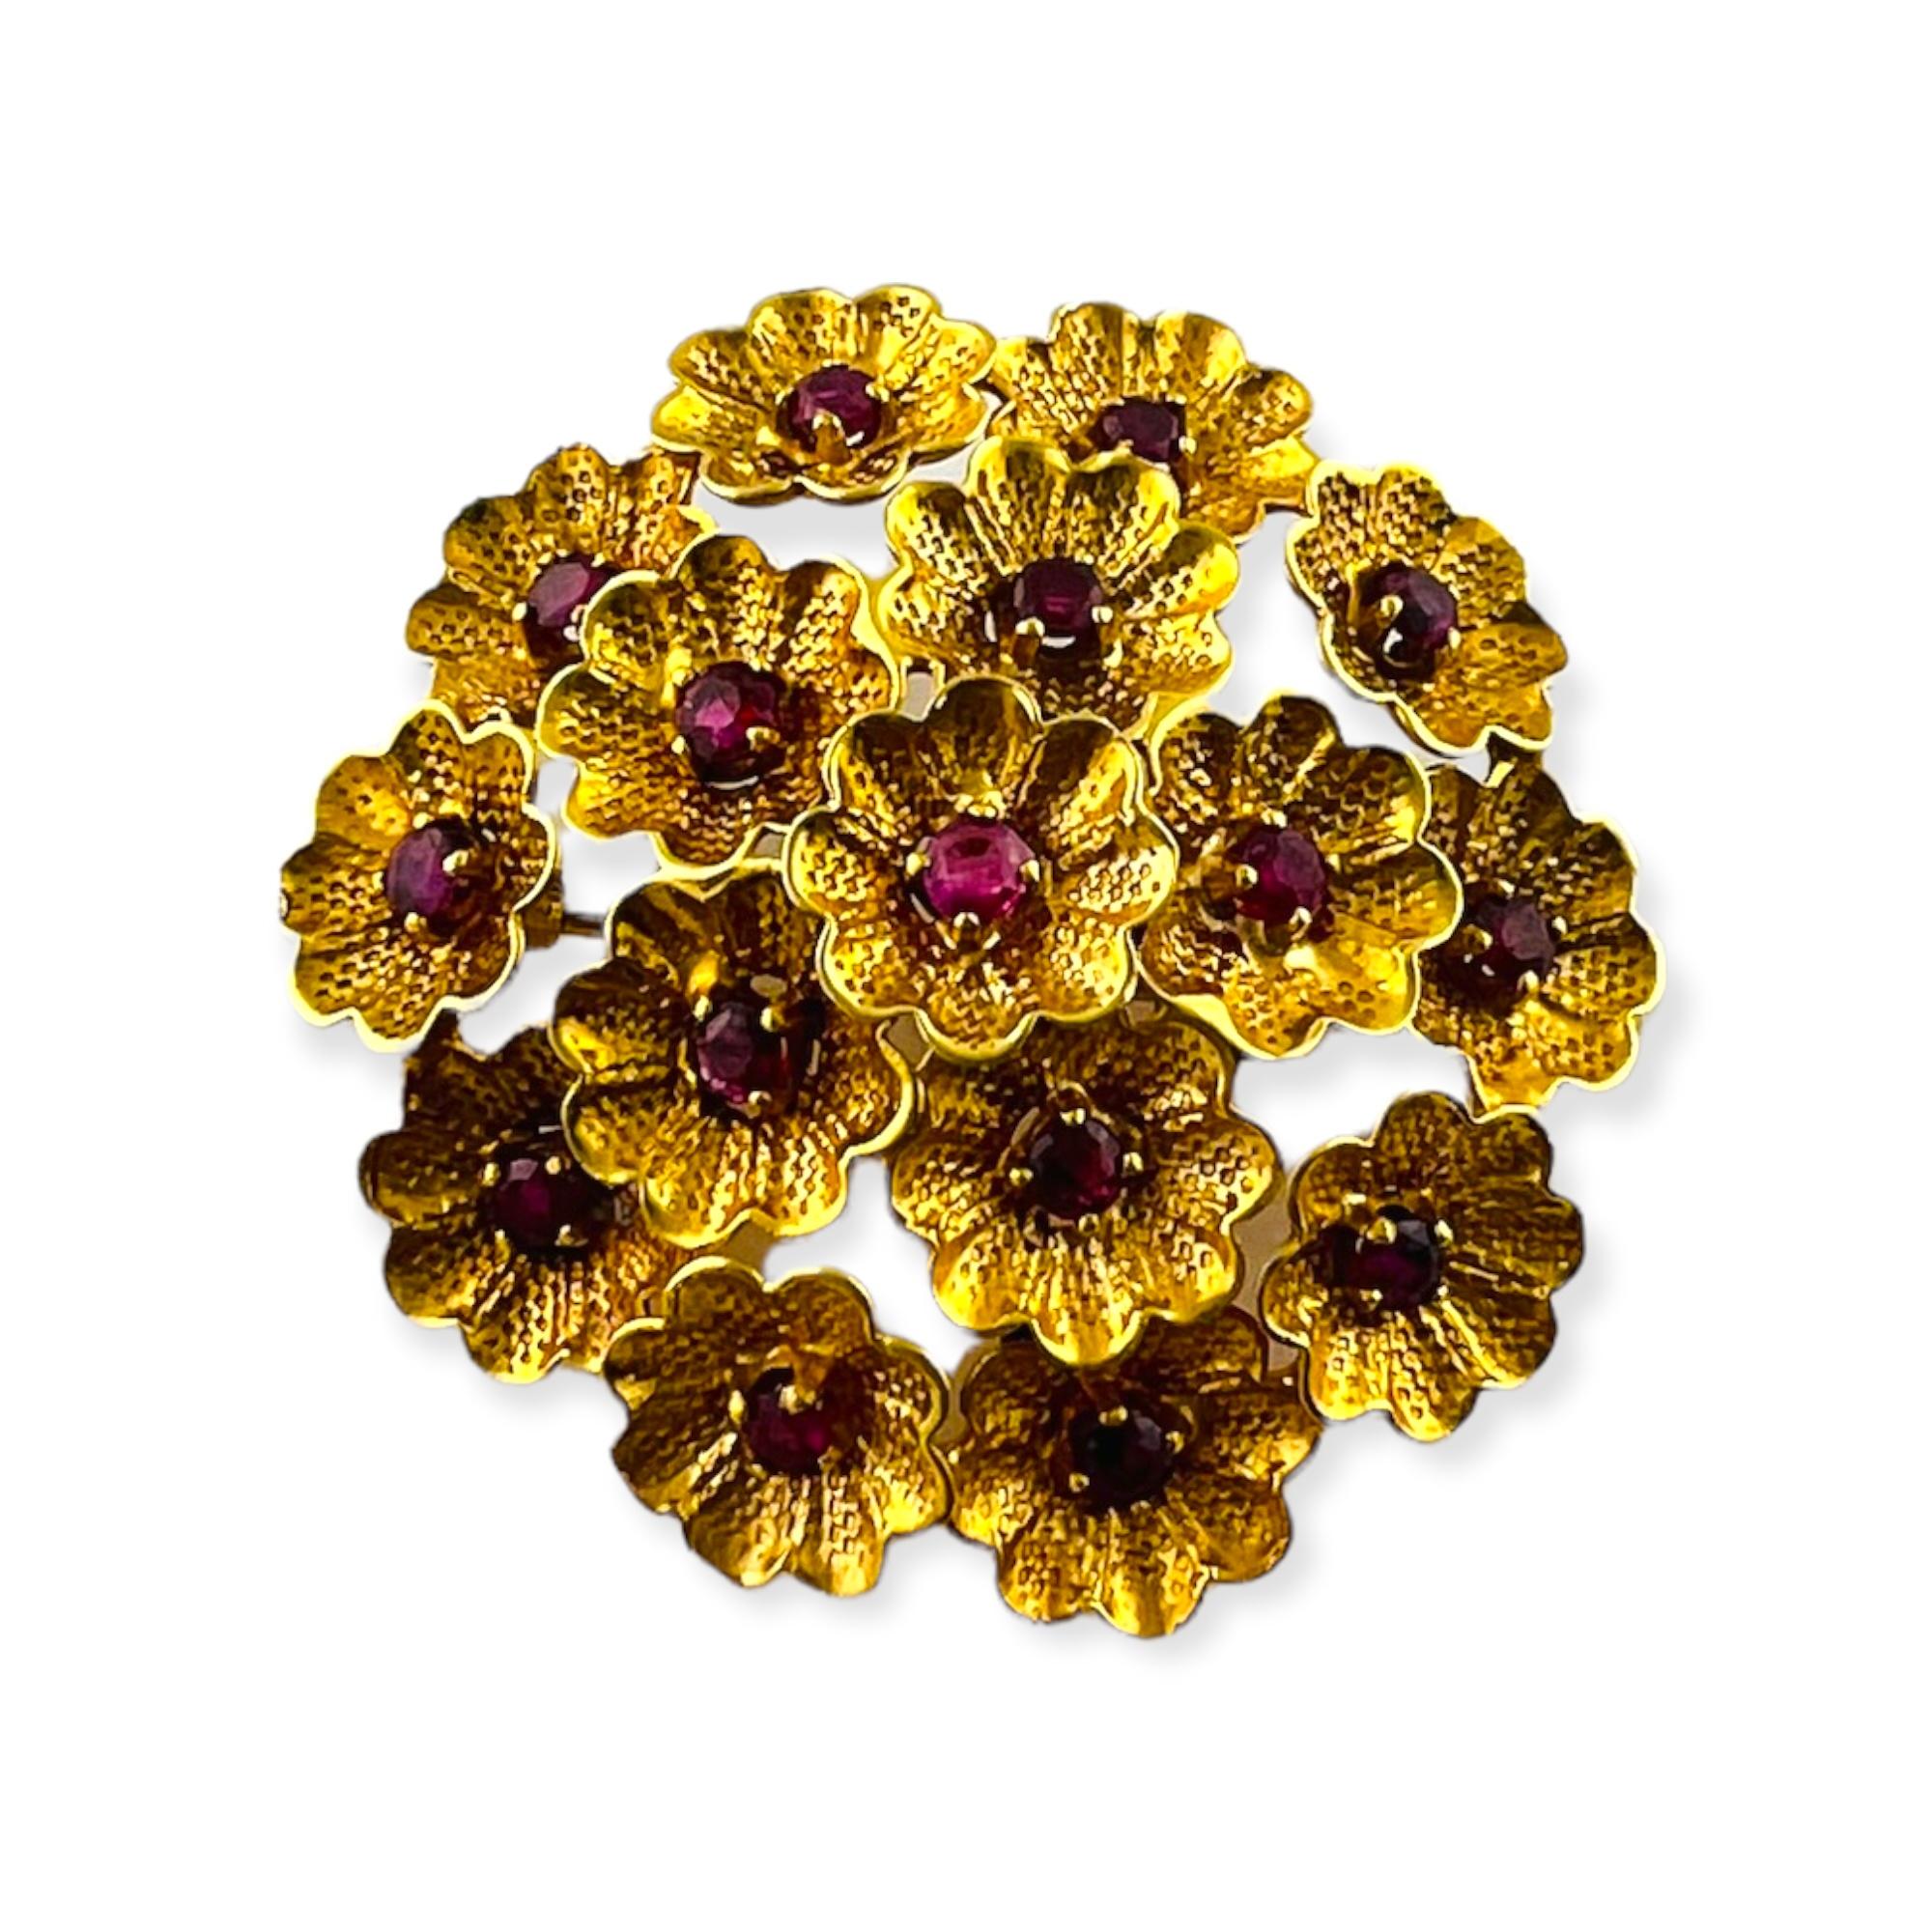 Vintage Cartier 18K Yellow Gold Ruby Flower Brooch

This beautiful 3D Cartier yellow gold brooch is a circular wreath of flowers with ruby centers

16 round rubies total approx. .80 cts.

Approx. 1.25